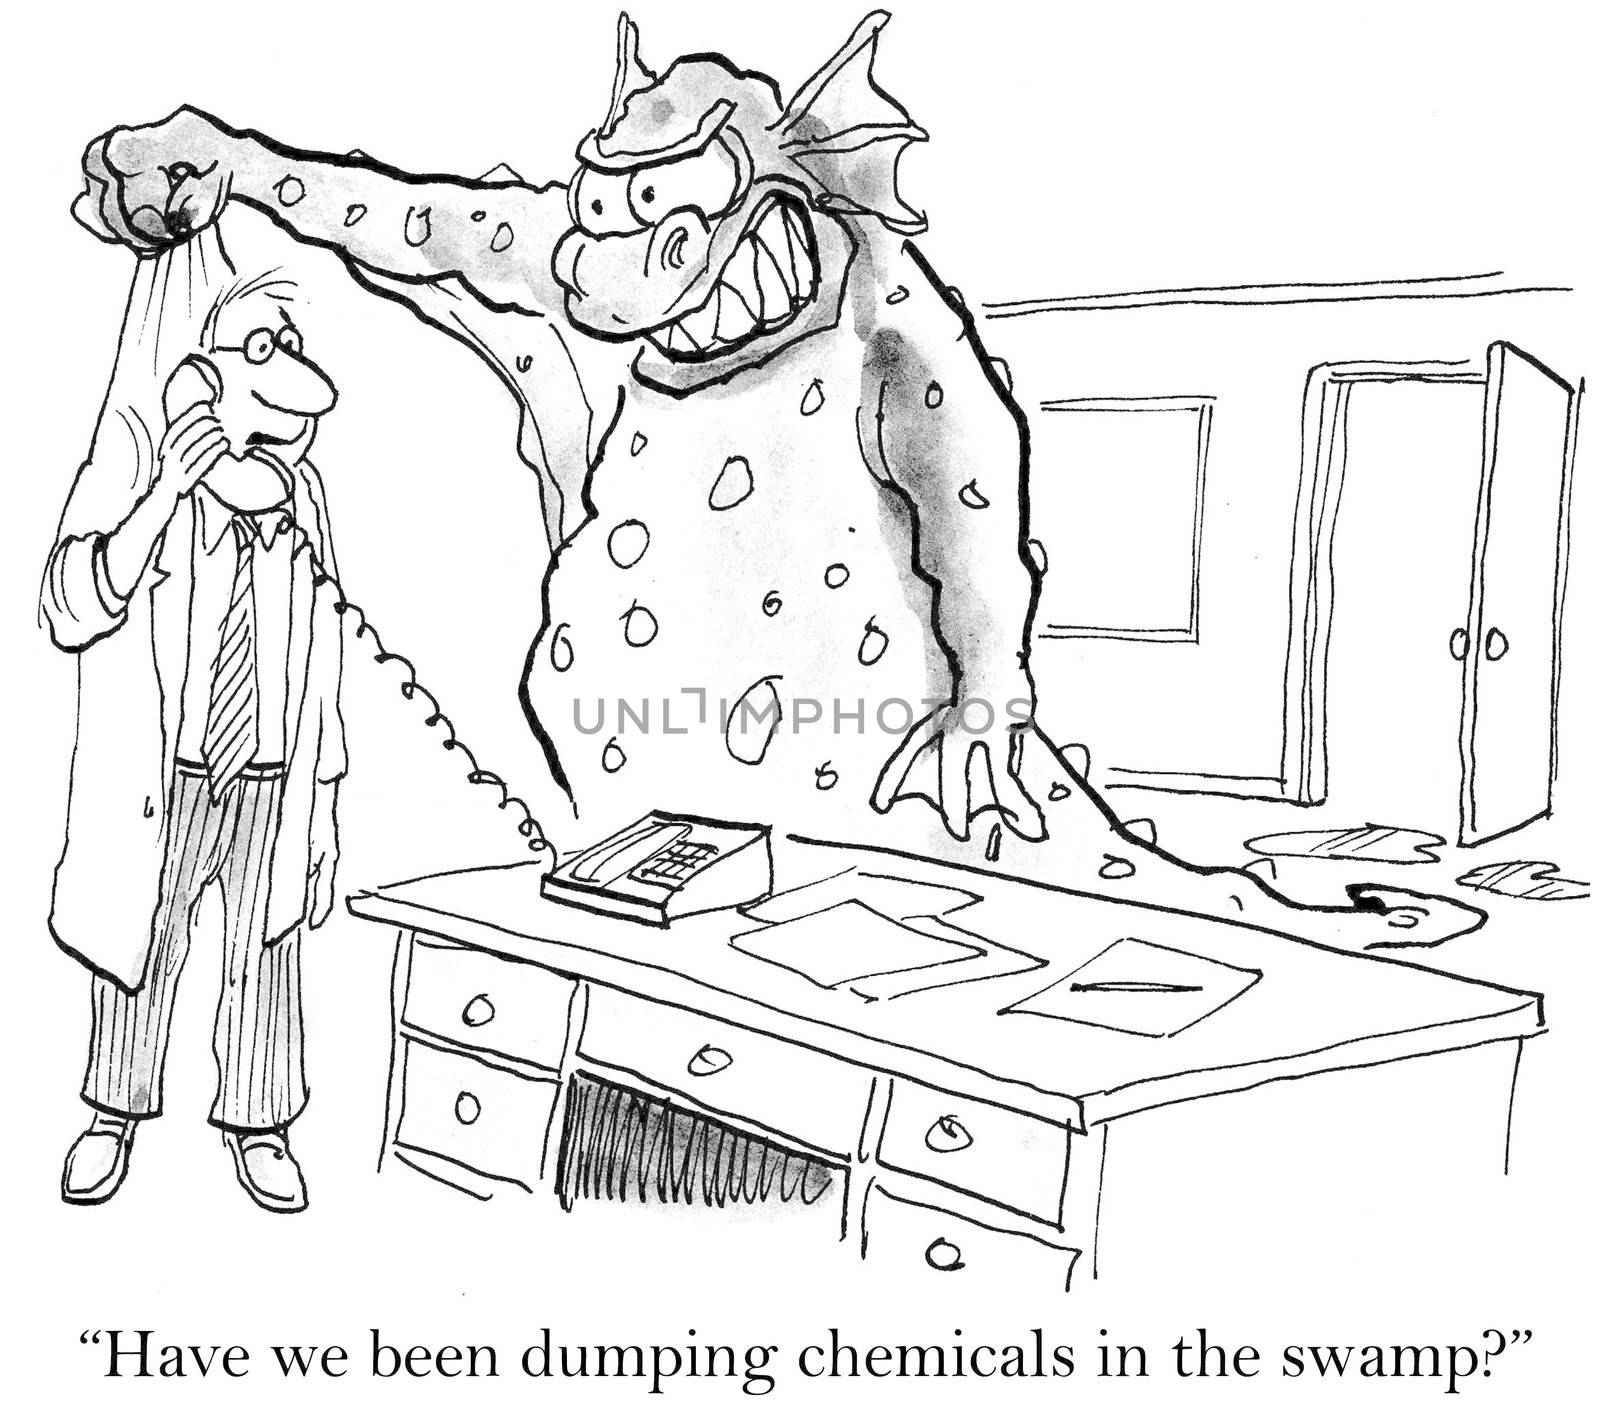 "Have we been dumping chemicals in the swamp?"